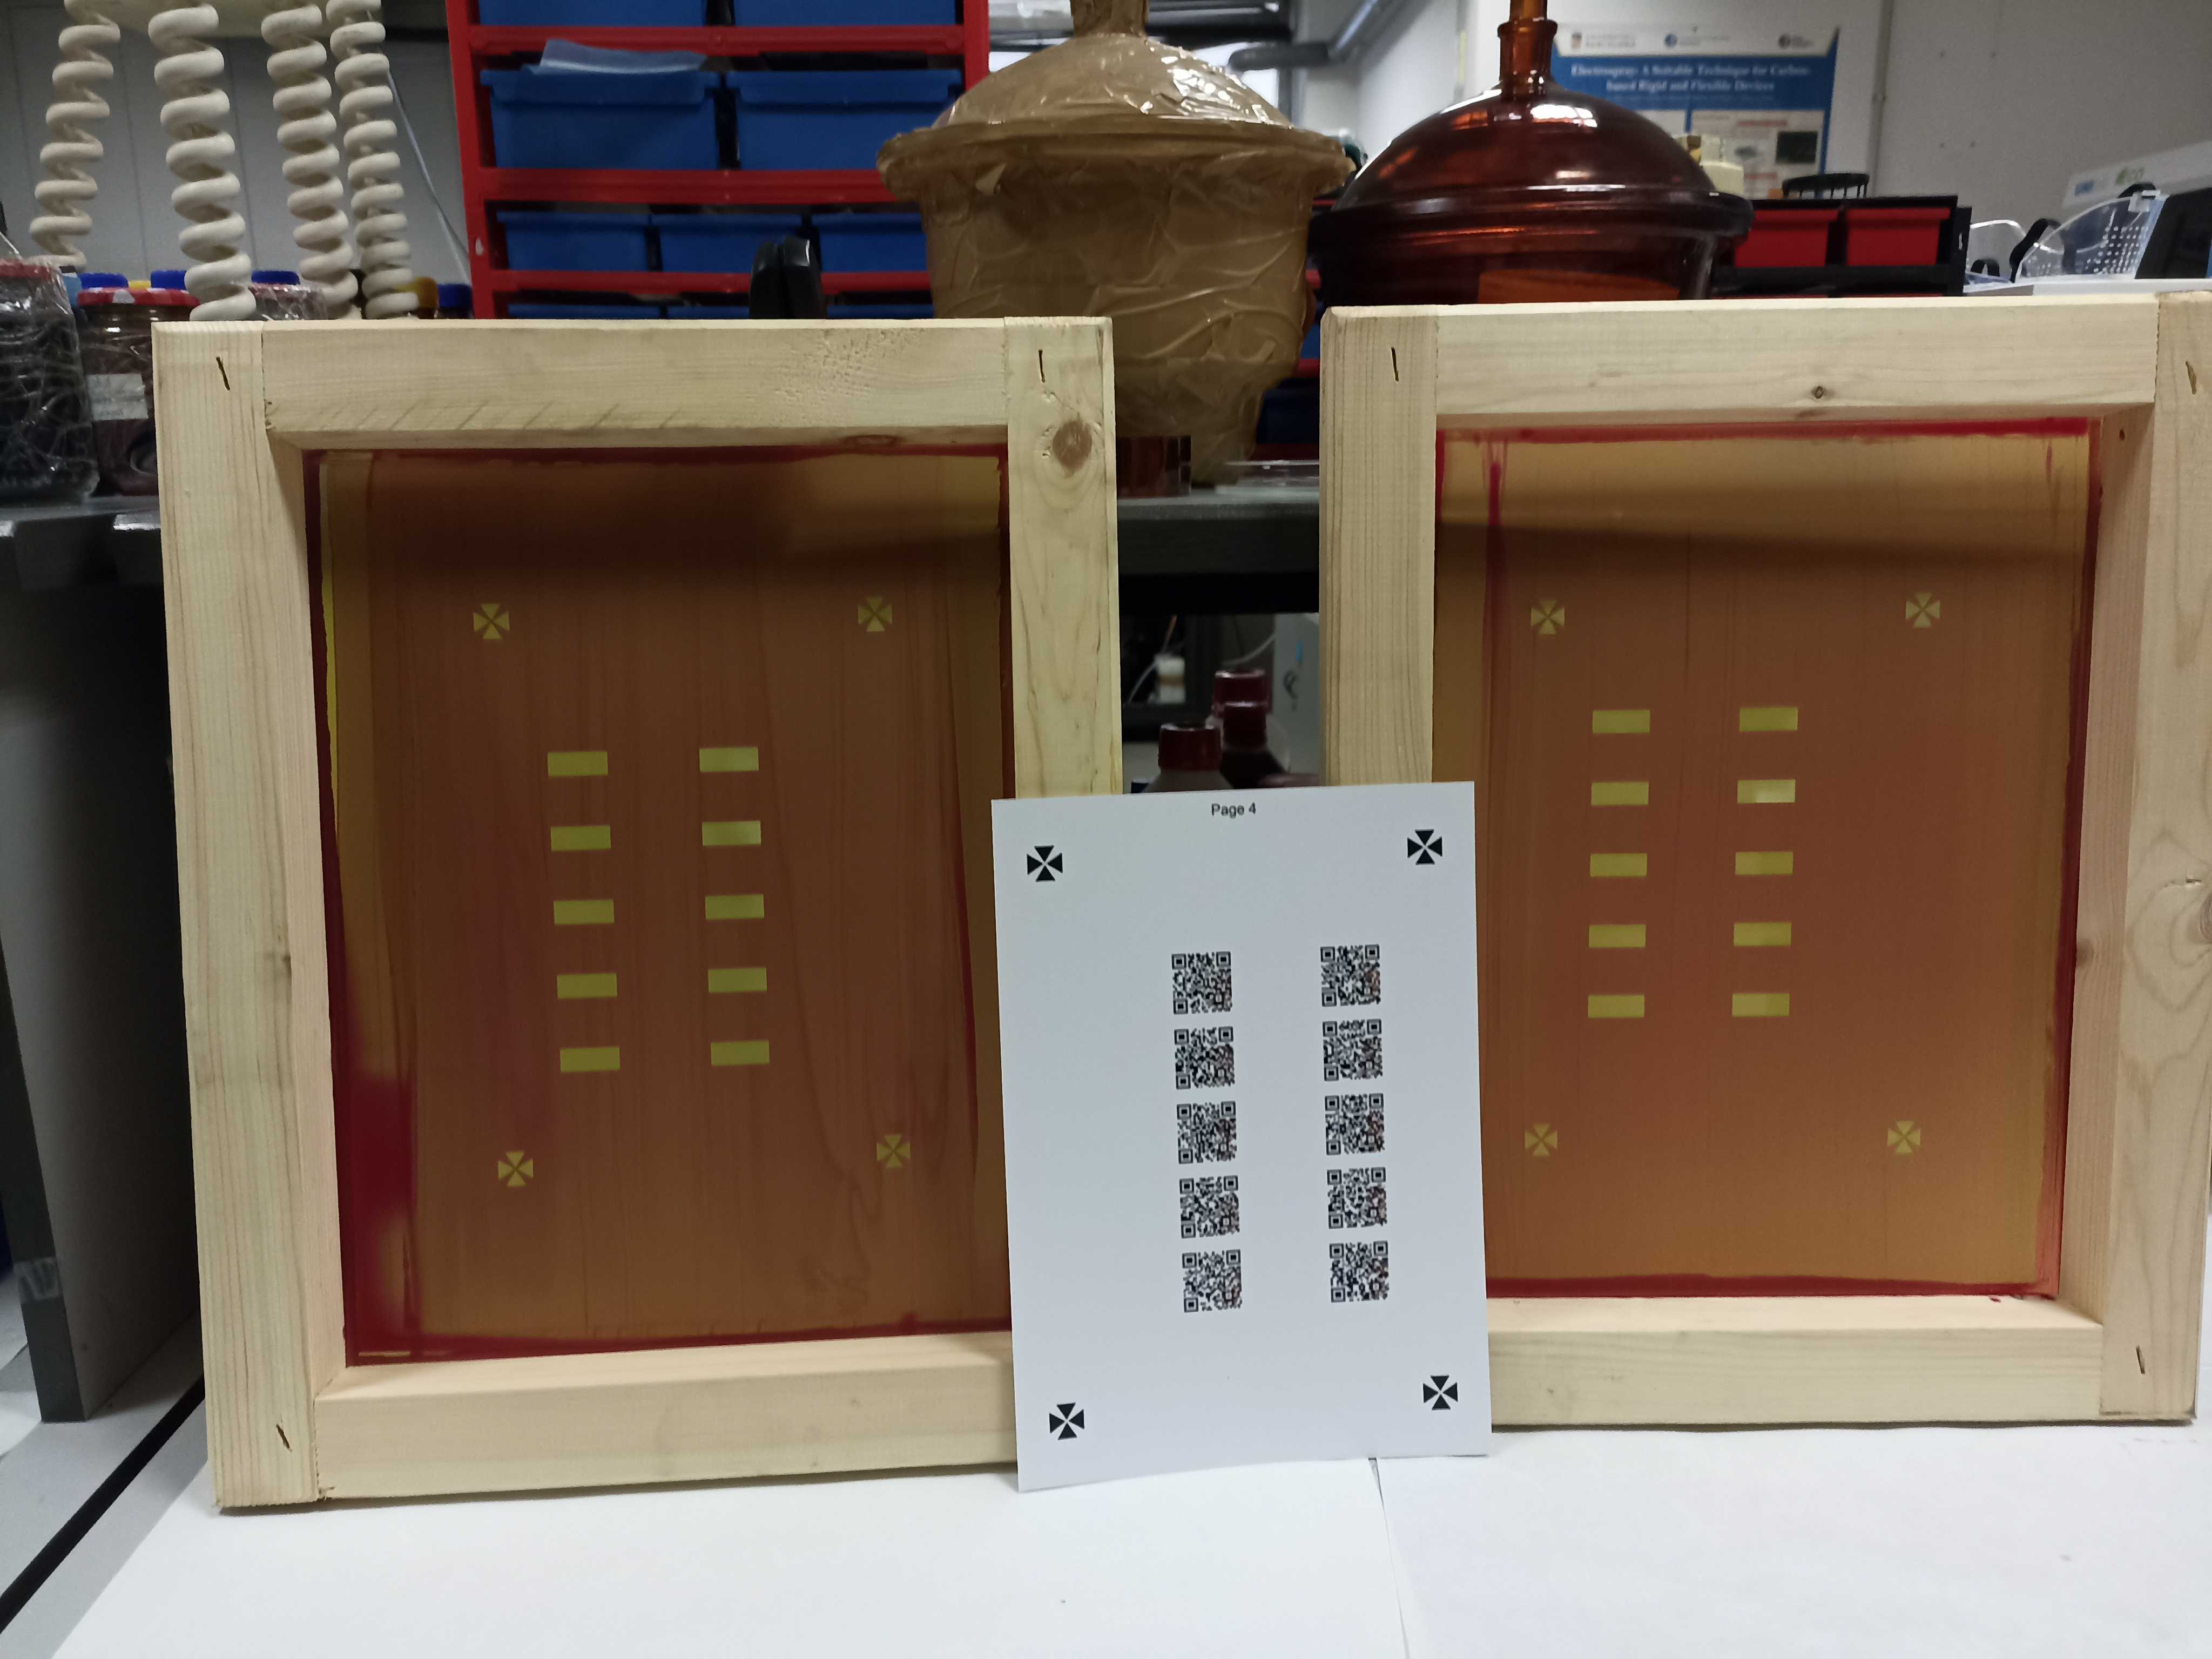 Two screens and one substrate sheet. Each screen can print one color indicator, and both can be combined into the same pattern. The substrate has DINA4 measures, it also contains up to 10 Color QR Codes with an approximated size of 1 inch.